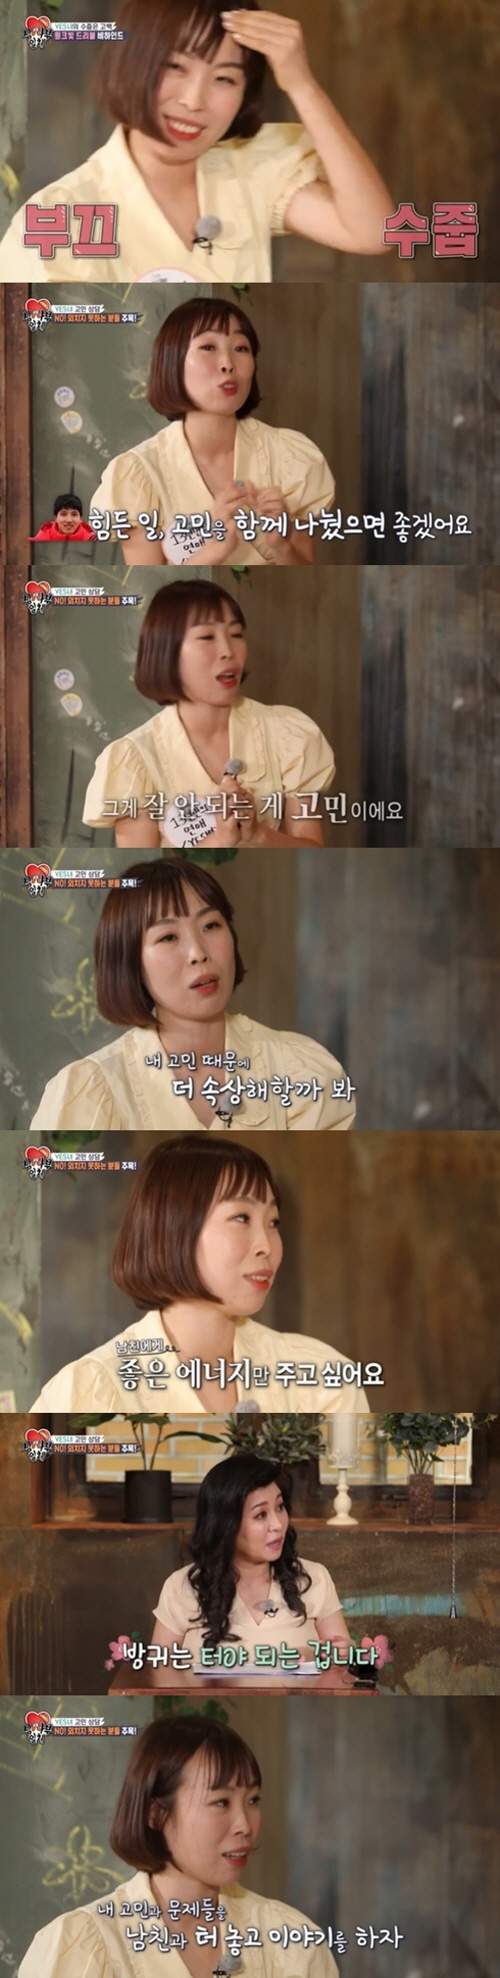 On the 17th, SBS entertainment All The Butlers held Oh Eun Youngs O Doctorates Secret Hauso.Oh Eun Young, who emphasized the danger of constipation in his mind, rolled his arms to solve the cool troubles.Counselors who needed counseling appeared, and All The Butlers members also talked with counselors.The first counselor came out with the worry of love, yes disease in 13 years. The counselor introduced herself as a single woman living in Seoul.The counselor said, I am not good at rejecting because I am sick of the disease. If someone asks me, I will do it.It was comedian Oh Nami.Oh Nami said: The new manager bought a hot coffee in the winter and left it in the car, but Im dead, I cant talk about it. Then I went to the cafe and said, What are you eating?I said ice americano. I said I liked ice americano. I was surprised why I hadnt told you. About a month.I appreciate the heart, so I (I didnt say it), he said.Lee Seung-gi said: Yes, I think all of them are the same. I do not ask for help. Thats the most stressful thing.I do not hear that you can not set up your own. Oh Nami surprised the crowd by saying, The most serious thing is money, I can not make a sound when I lend it, and my close friend borrowed up to 30 million won because I needed money.Someone told me that. I thought there was a good complex. You have to be good to everyone.I have to say good things to everyone and not bad things to everyone. I heard that I should throw away this.I also confessed about love: Oh Nami said: I started dating in the last 13 years, Boy friend should be the closest and secretless, frankly.I can not even say that when I have a hard or bad thing, I will not be able to say that Boy friend will be hard. Boy friend was upset with that. Oh Eun Young asked, Do you fart with Boy friend? Oh Nami replied, I didnt open it, said Saint-Earl, who had shown it.When asked if he had received a lot of praise for being good since he was a child, he replied, I heard the best.Oh Nami, who is in love with Park Min, a soccer player, said of his first meeting, I have a brother playing soccer.My brother (now Boy friend) said, What is your ideal type of entertainer? But I dont believe it, but he told me about me.I said that Oh Nami is very attractive. I know Nami. I was introduced to this. I was so nervous. Oh Nami said, I was driving in the car and suddenly the Friend said, Can I hold your hand? I said, I have a cold hand.I wanted to check my mind and said that I talked about it. I tried to turn the neighborhood around, but I turned five laps. I liked perfume because I liked what I liked, and I said so. Boy friend was already wearing it.I got into the Friend car and it smelled like that. Ive put it on my seat belt to smell more.It gives a lot of consideration, he boasted.But Boy friends like to open and share hard work, bad work, and troubles, but I do not like it.I want to share it, but I was upset because I did not say that. I thought I should give him good energy. Oh Eun Young asked, Have you ever swarmed and whined at your parents? Oh Nami said, No, Grandma, Grandpa raised me so much that I didnt do it.I think its like a fool, Ive heard a lot about being stupid, he said.Oh Eun Young said: Mr Nami wants to be a good person for others, so hes just trying to look good.If you do not listen to others requests, you can judge that it is good for the relationship that you do not give this when you think about it. When you say no money, Why do not you do it? This sound is painful.I think I am not a good person, so I think I will think that I am stupid. Mr. Nami is a good person as it is, and he always seems to like me just to show me this way without being Nice and fart.In other words, I am a good person in any situation. It is related to self-esteem.If I do not pay, I will have confidence in him and me. I think I should be proud. He also advised on his relationship with Boy Friend: Its called normal regression, by regressing in a very close relationship, its about getting comfort and comfort in the mind.This is how you relieve your stress. You can fart during normal regression. You have to. Basically, trust must remain unchanged.I have to be a person who respects and loves me as a human being without decorating. Photo: SBS Broadcasting Screen